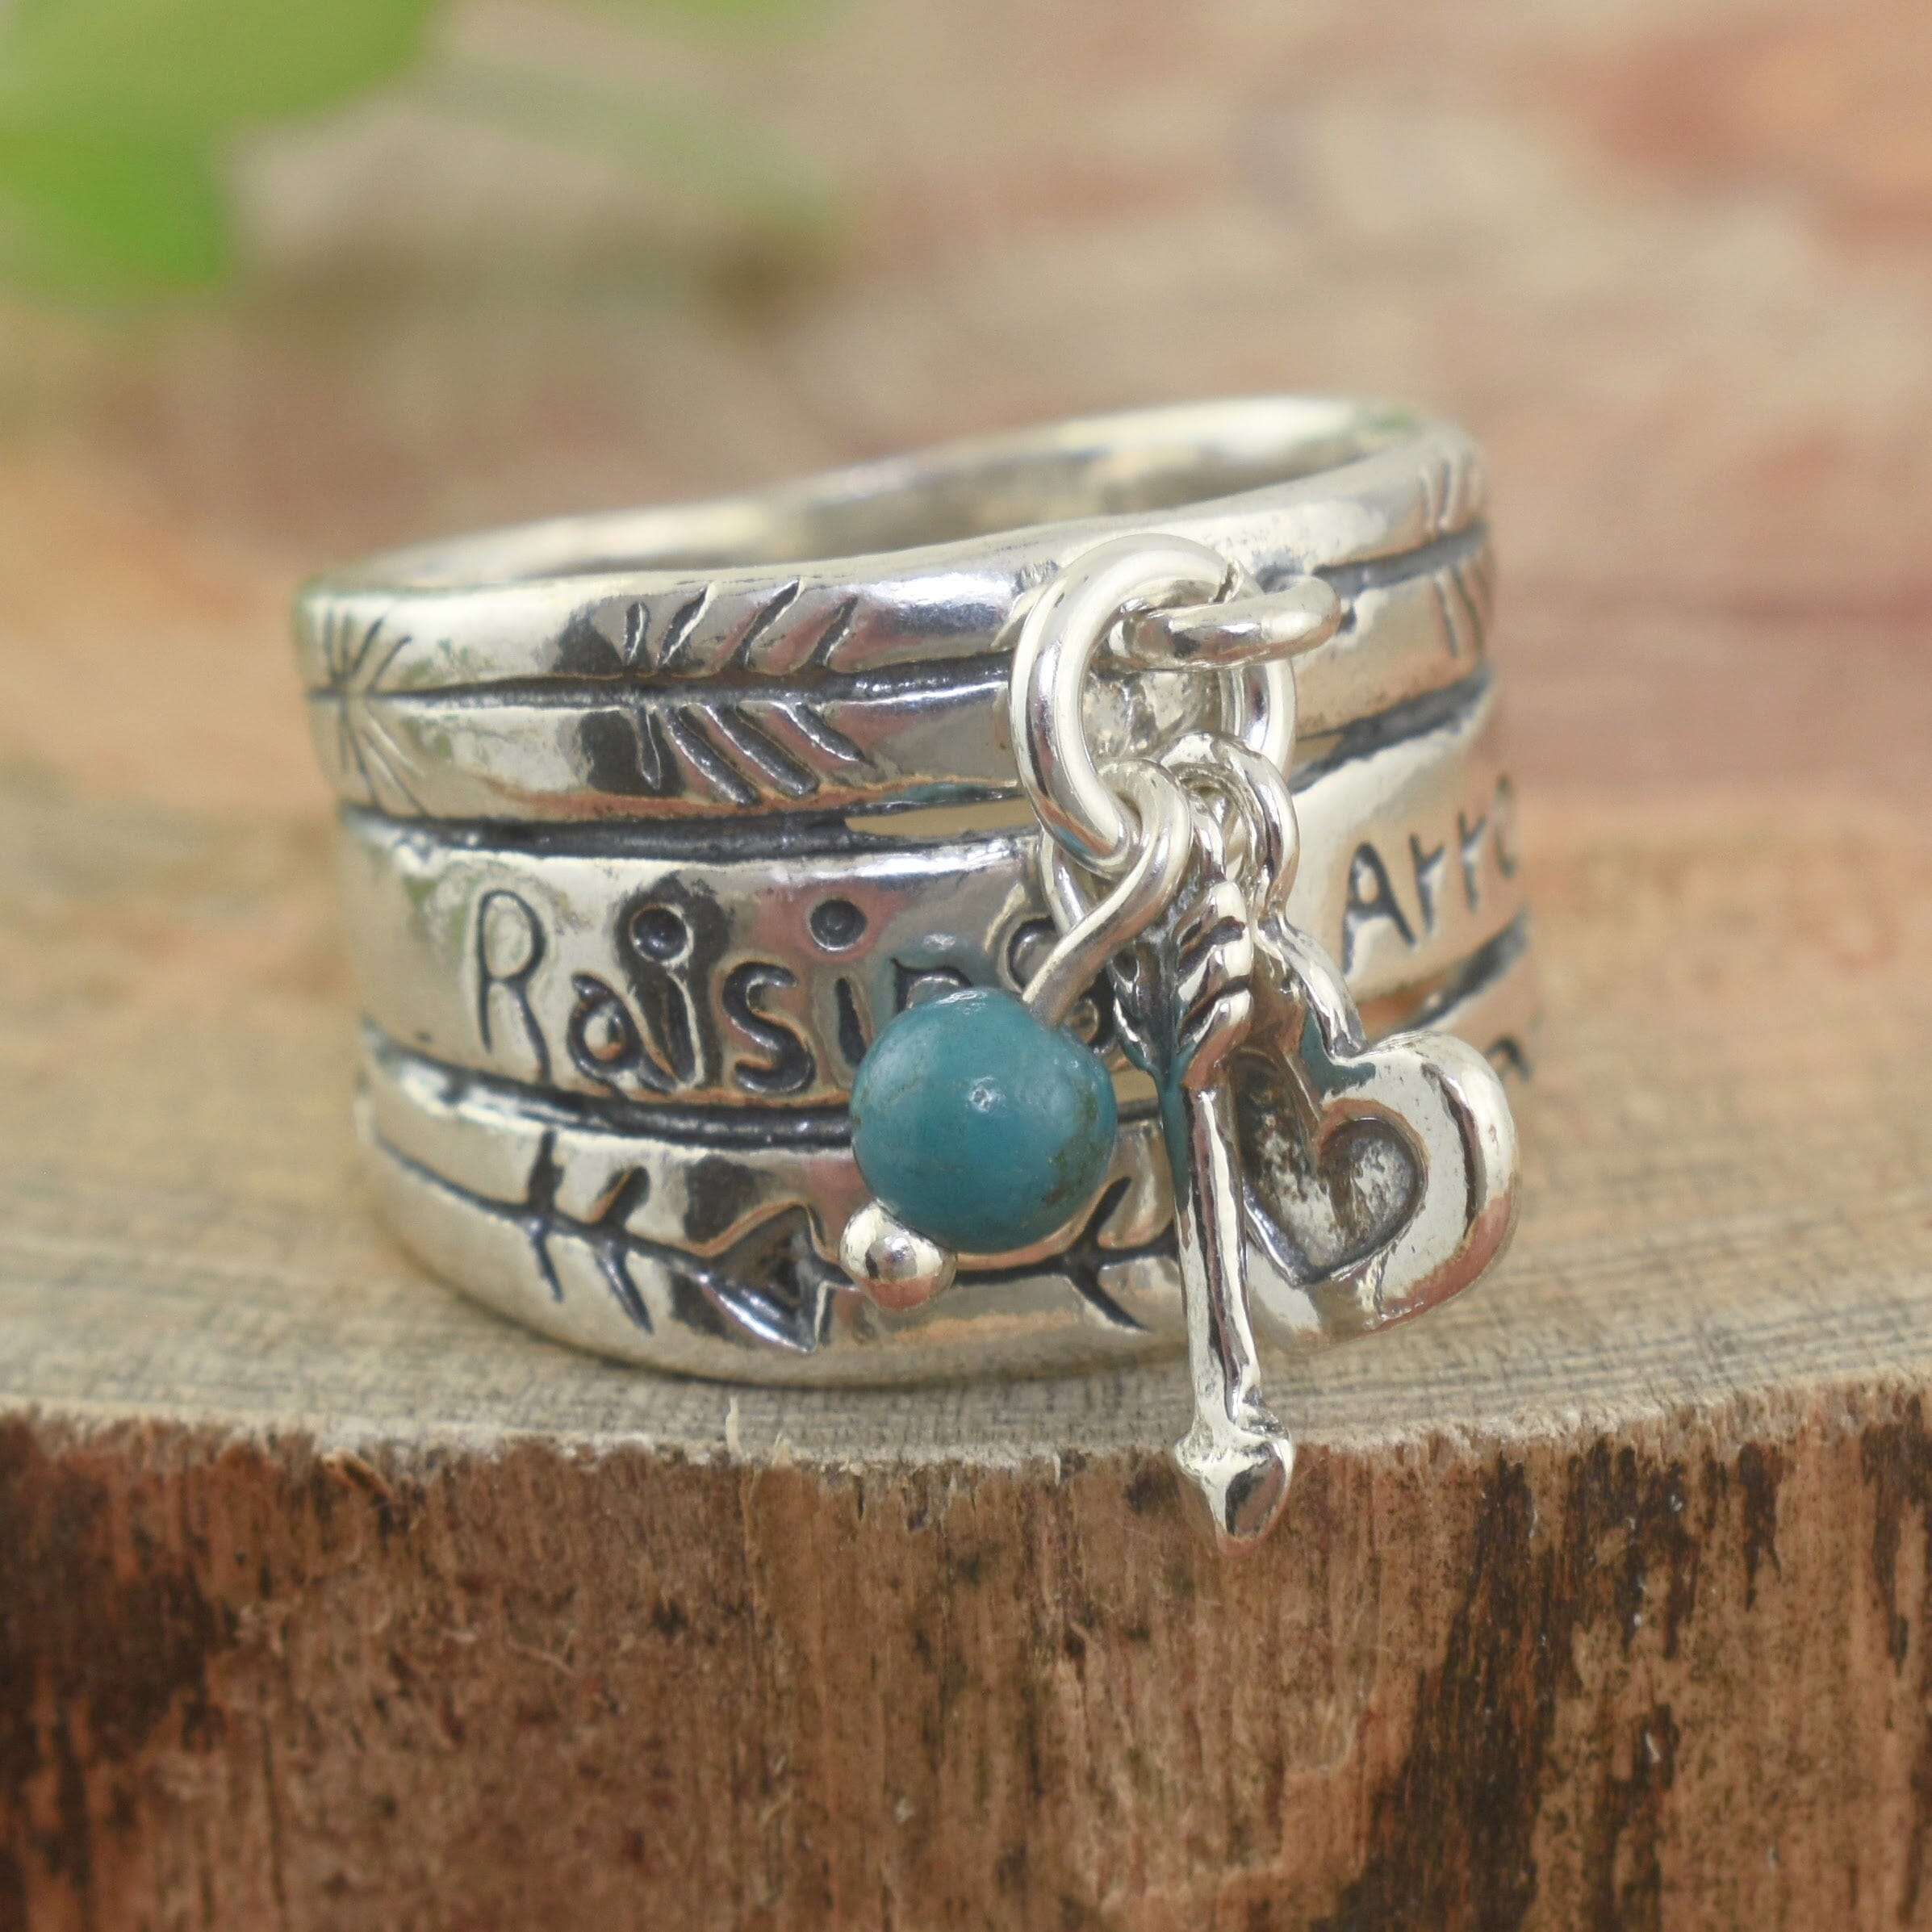 Sterling silver ring inscribed with phrase "Raising Arrows"